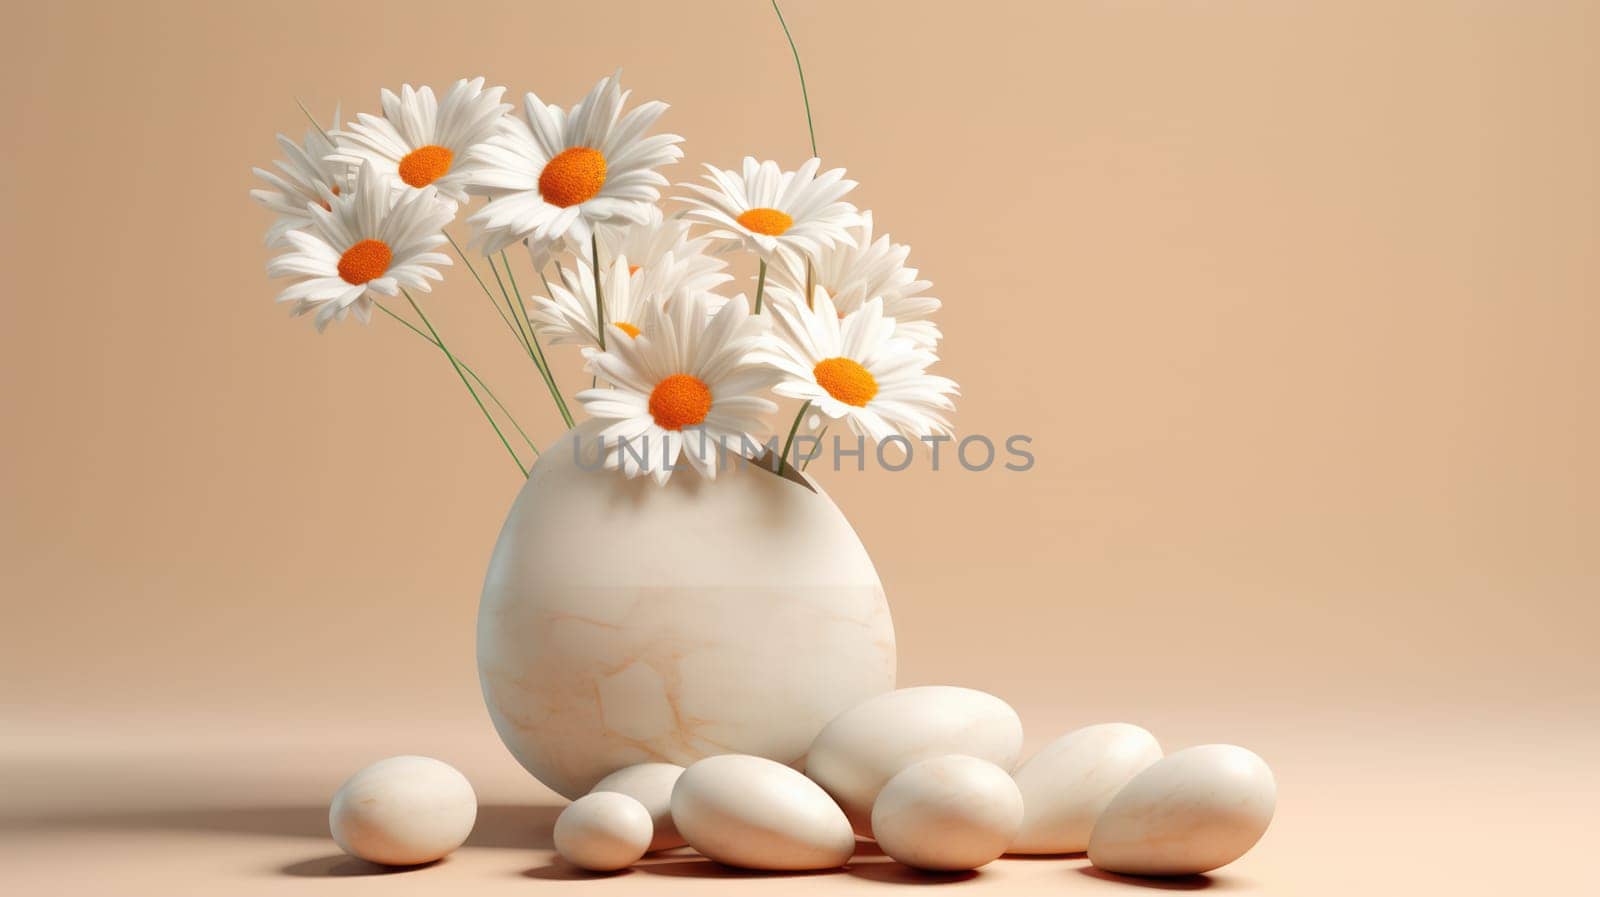 White Spring: Floral Bouquet on Wooden Table, a Bright and Fresh Decoration for a Rustic Holiday Card by Vichizh